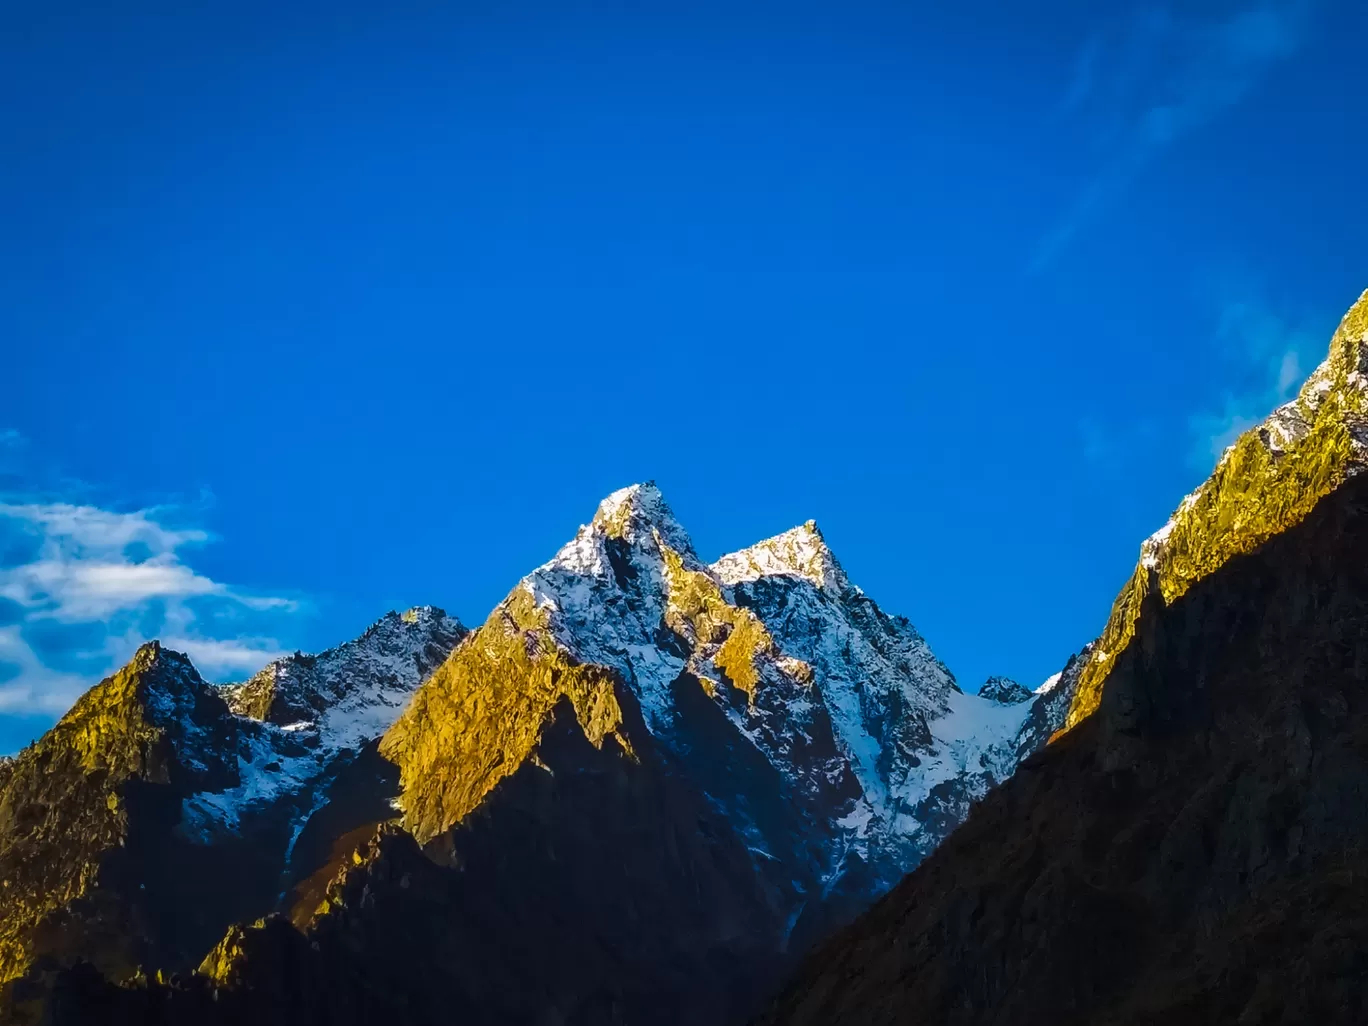 Photo of Himalayas By Deepesh dhonde